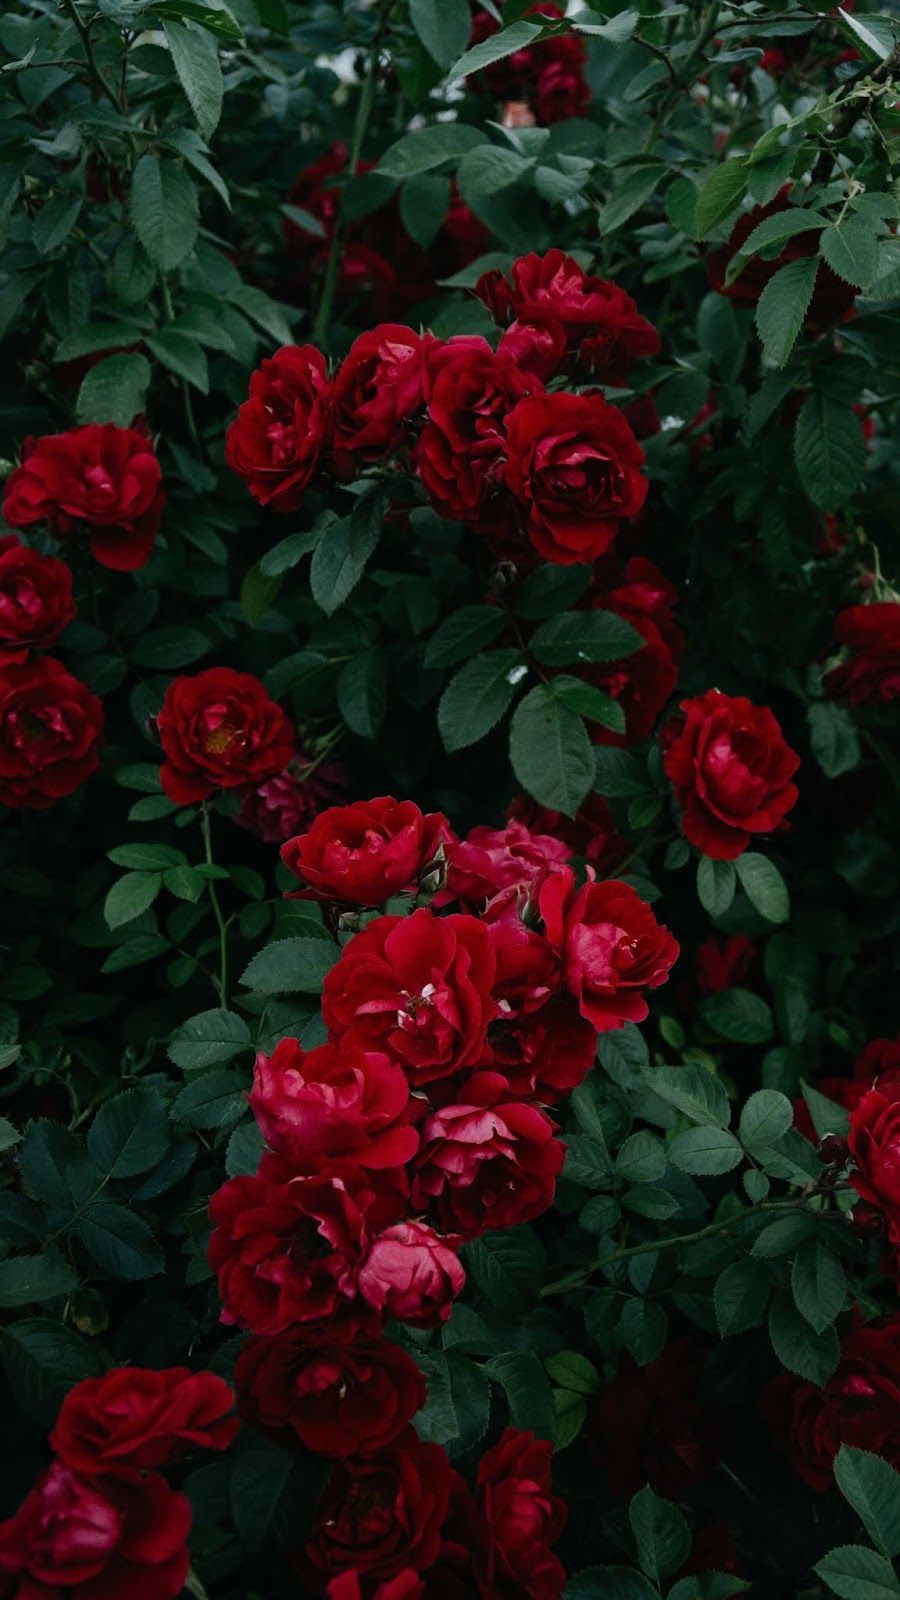 Red rose aesthetic #wallpaper #iphone #android #background